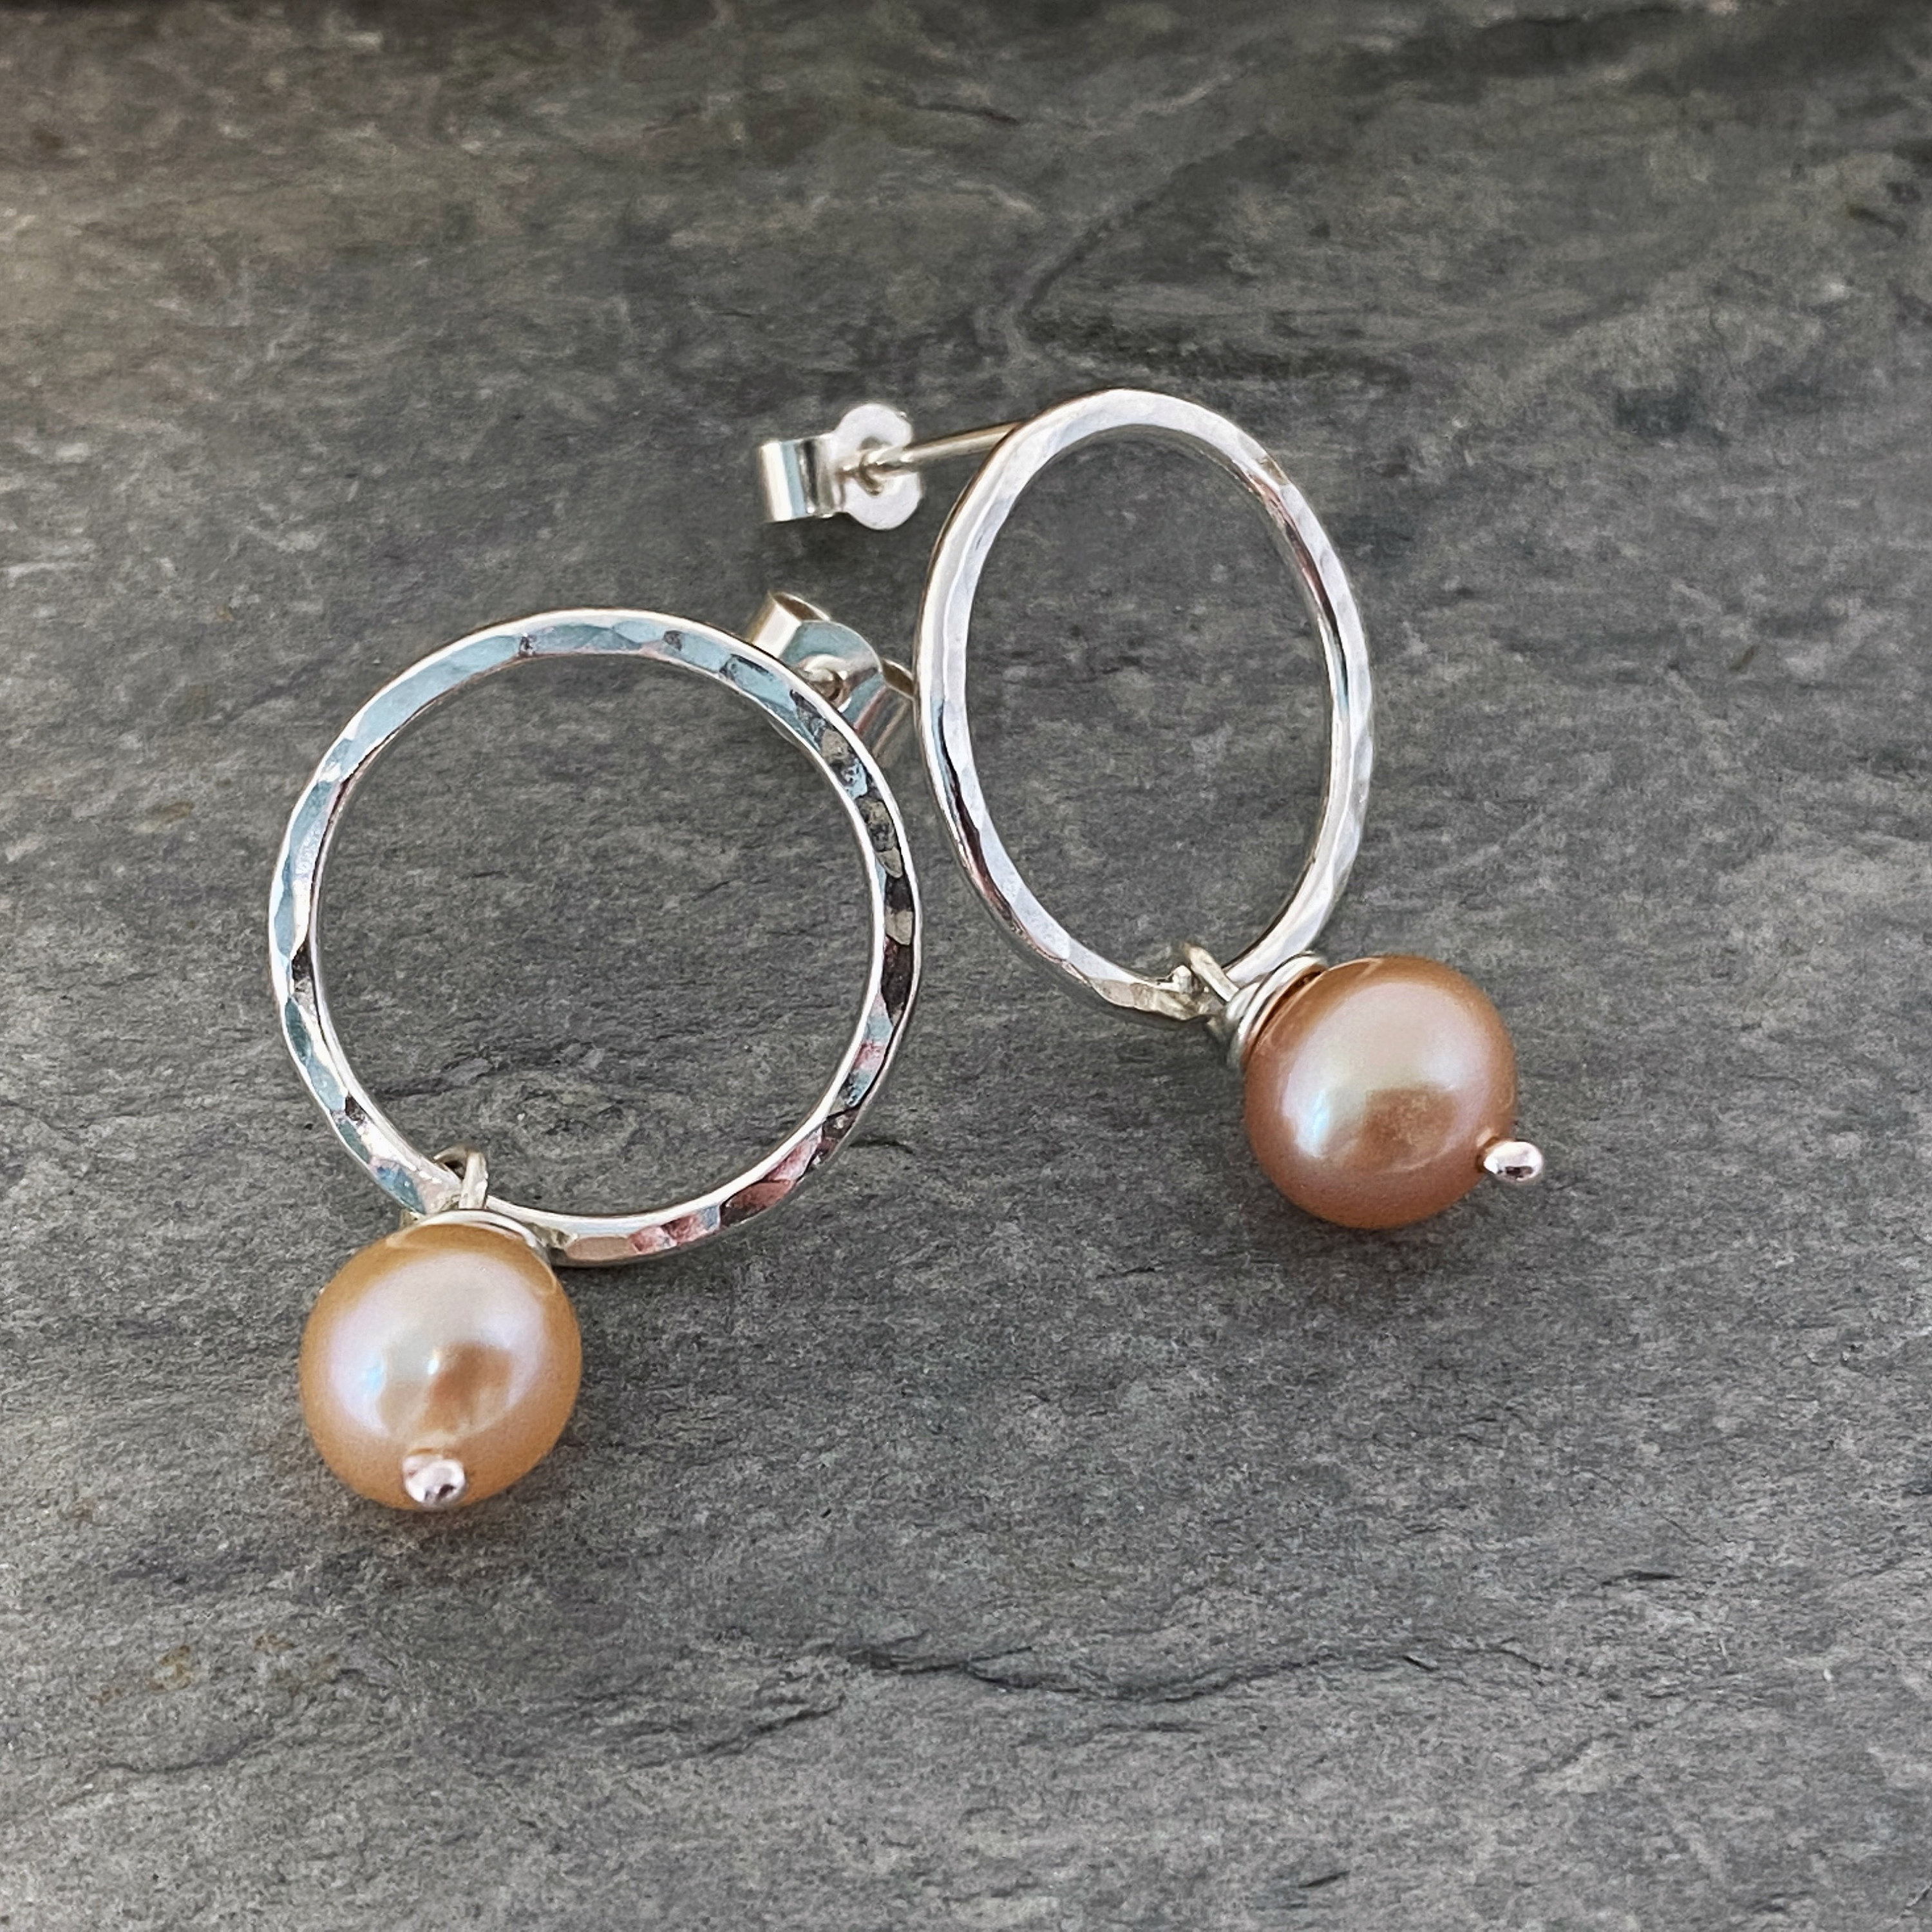 Open Circle Stud Earrings With Pink Freshwater Pearl Drops, Hammered Silver Rings A Wire Wrapped Dangle